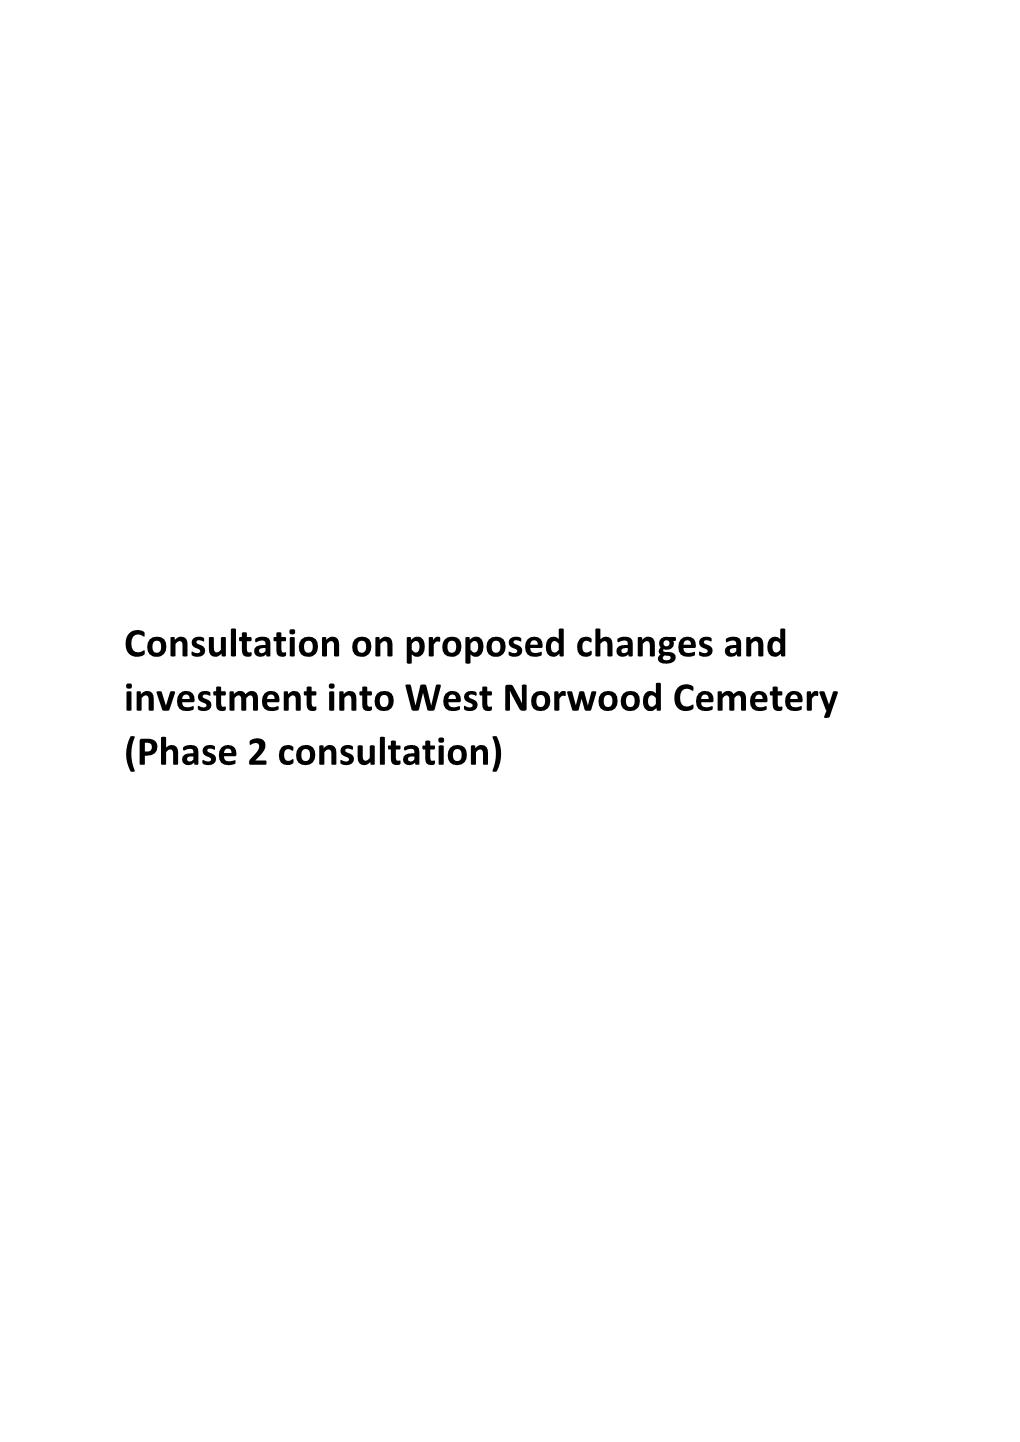 Consultation on Proposed Changes and Investment Into West Norwood Cemetery (Phase 2 Consultation)